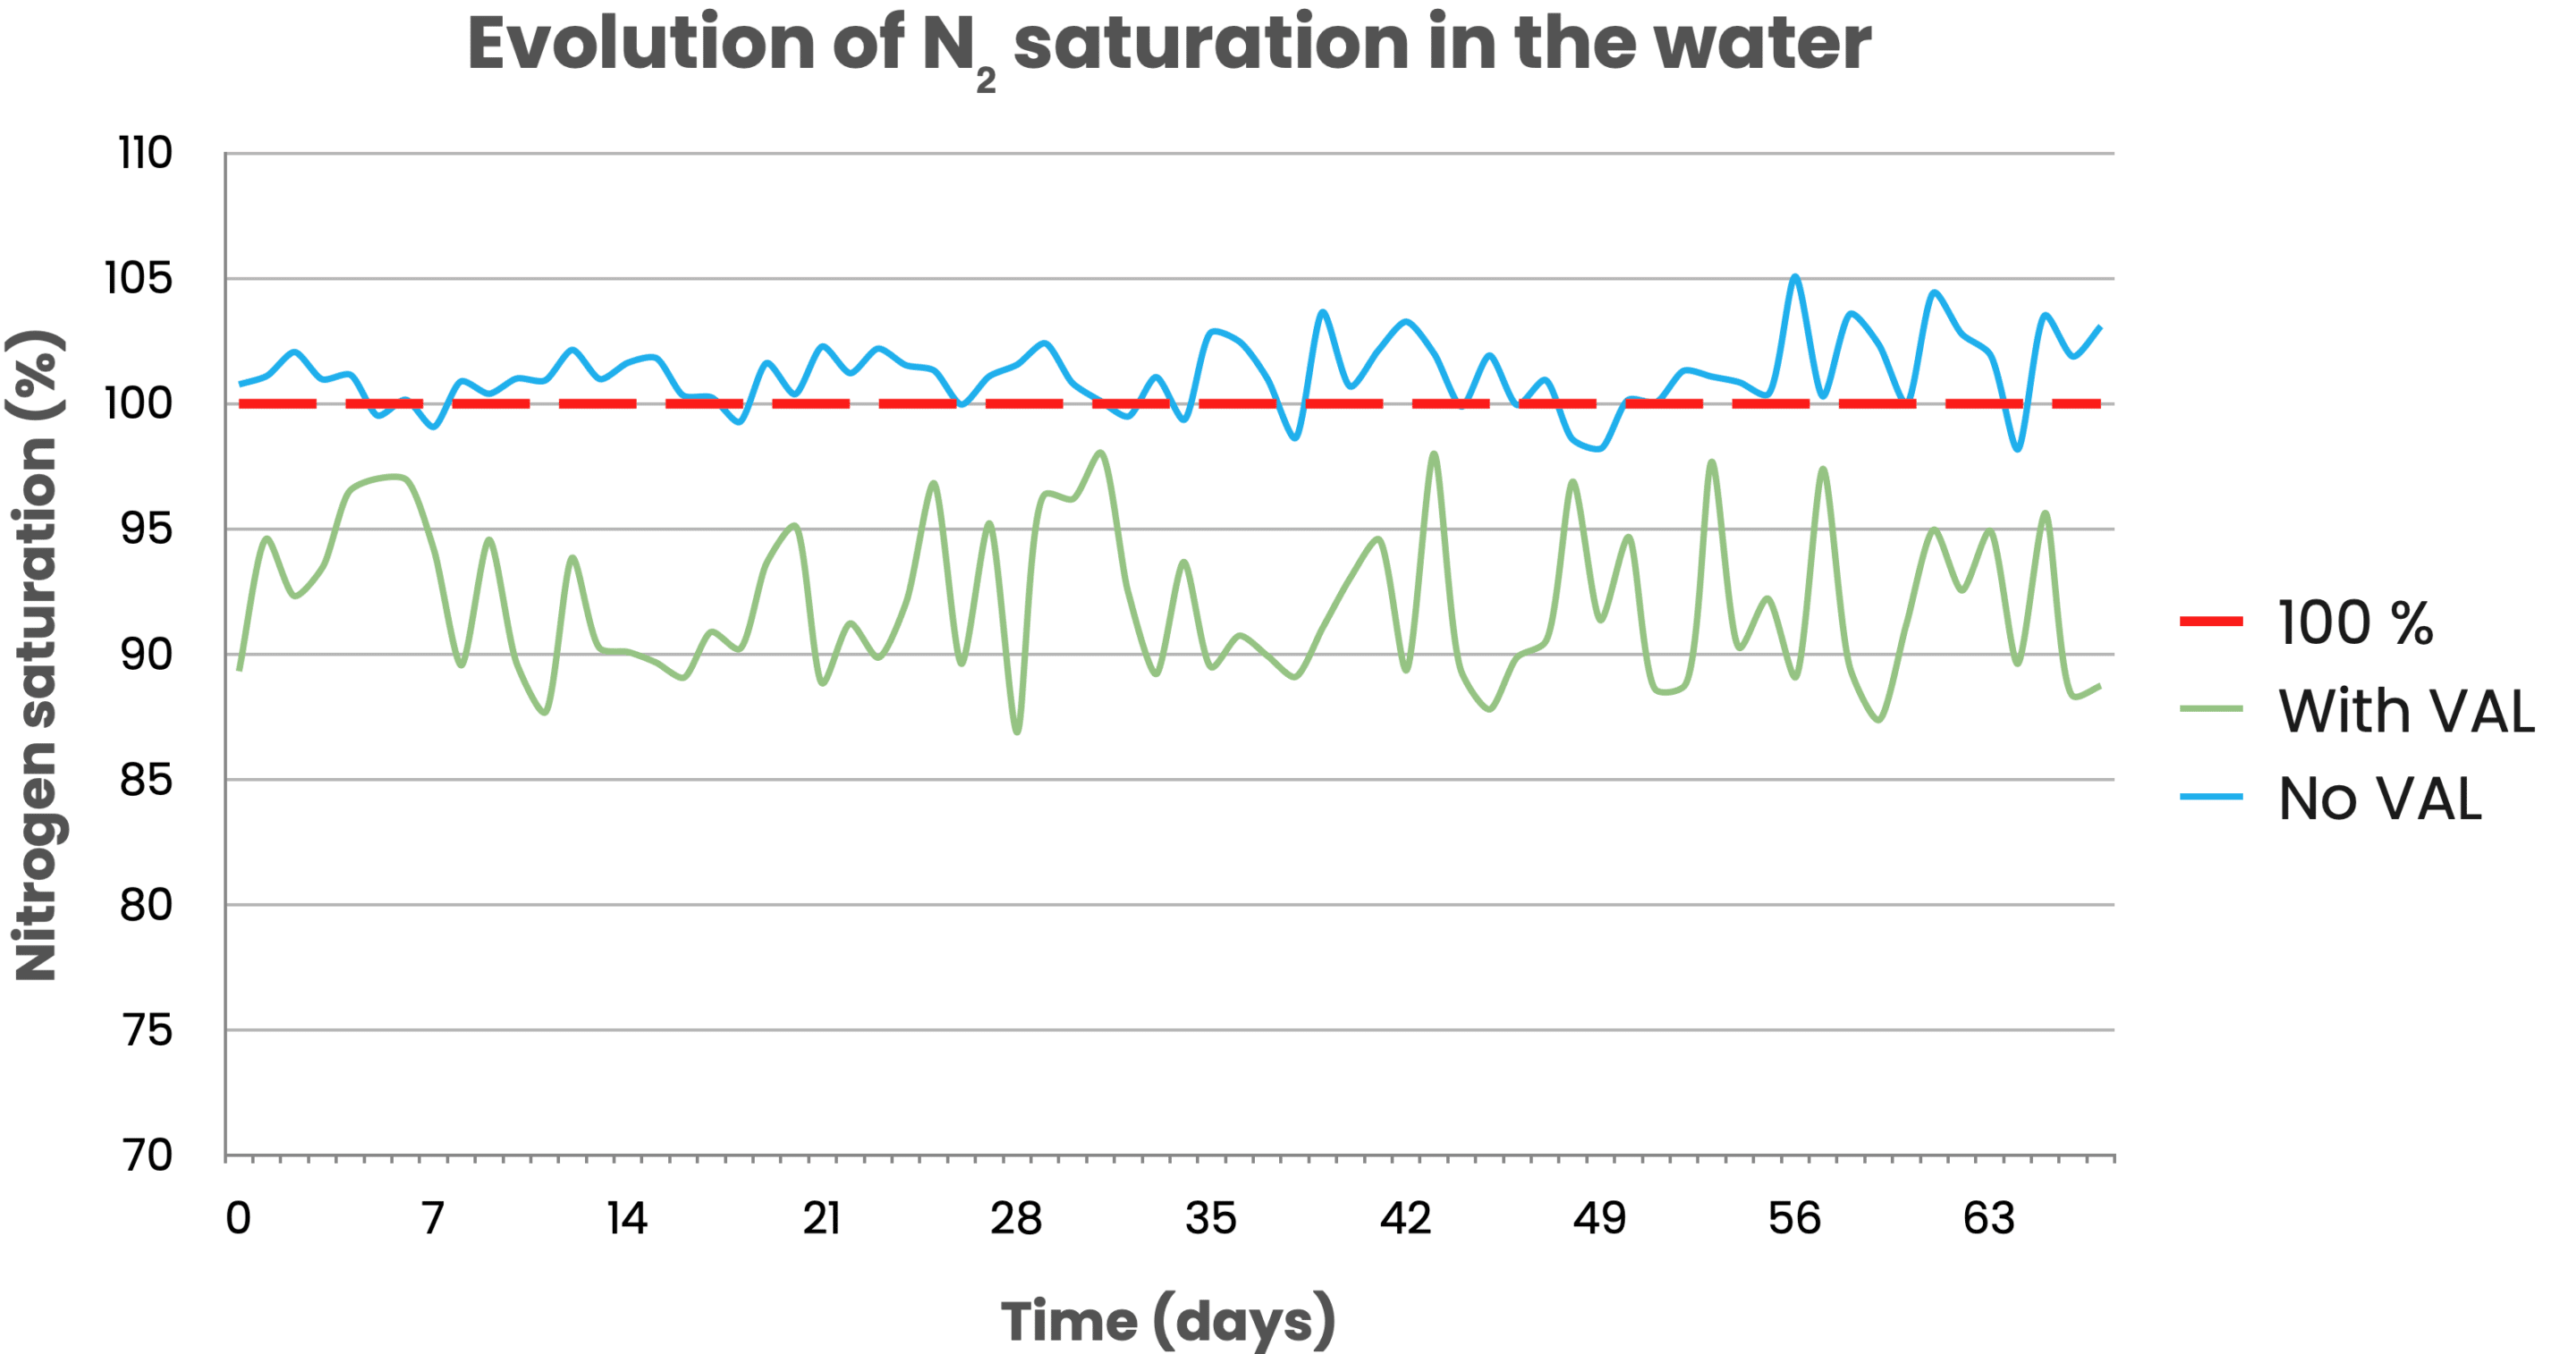 Chart showing the limited nitrogen saturation in the water of a system with VAL comparing to a system with no VAL